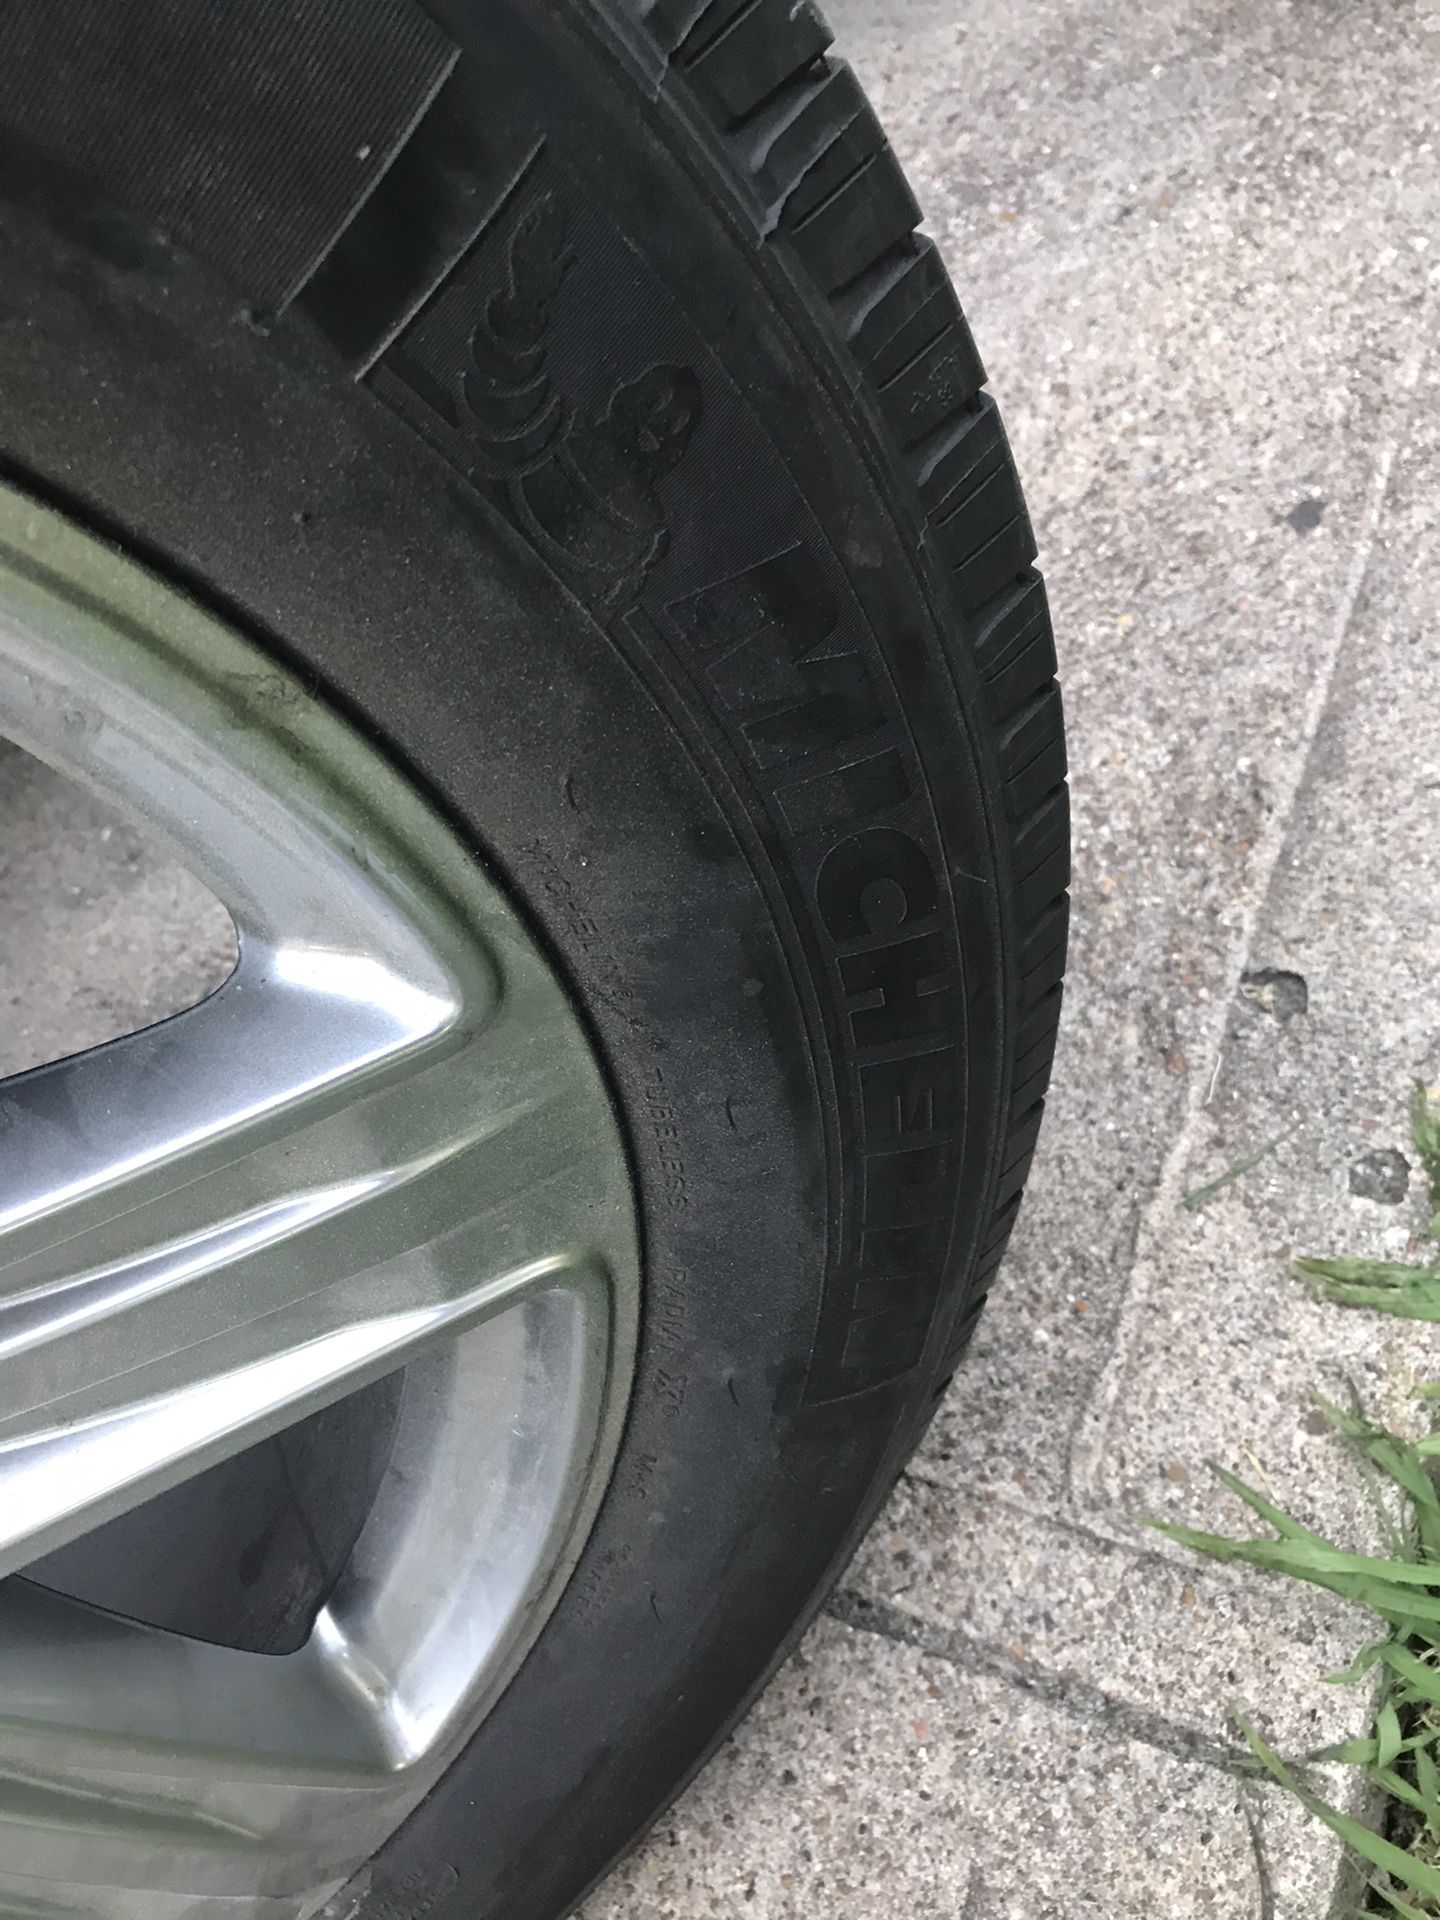 2018 F150 rims and tires all four the same